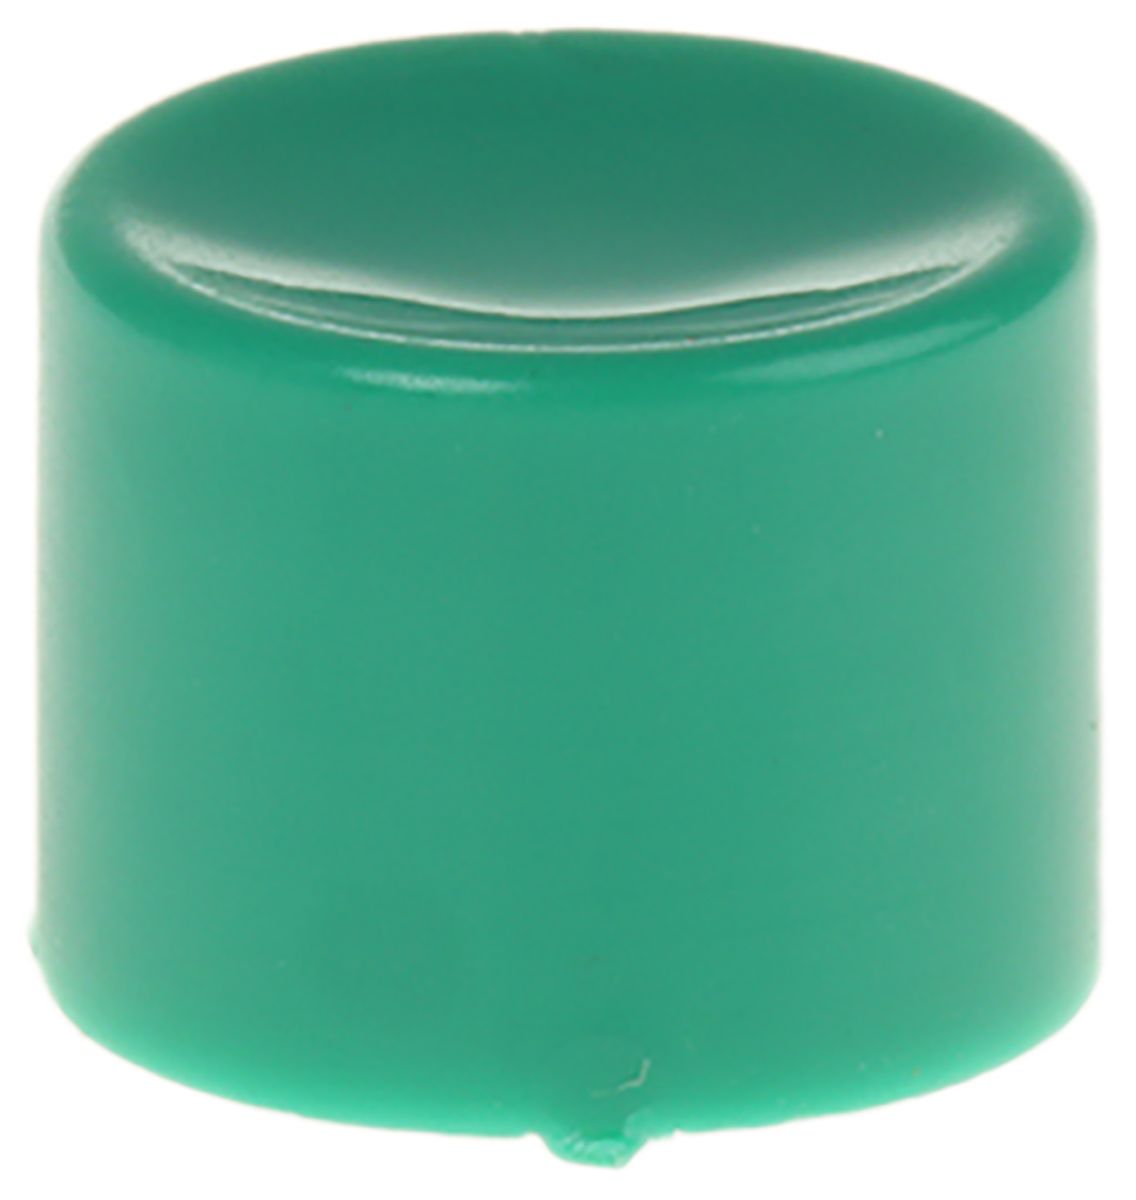 APEM Green Push Button Cap for Use with Apem 9600 Series (Sub-Miniature Panel Mount Switch)